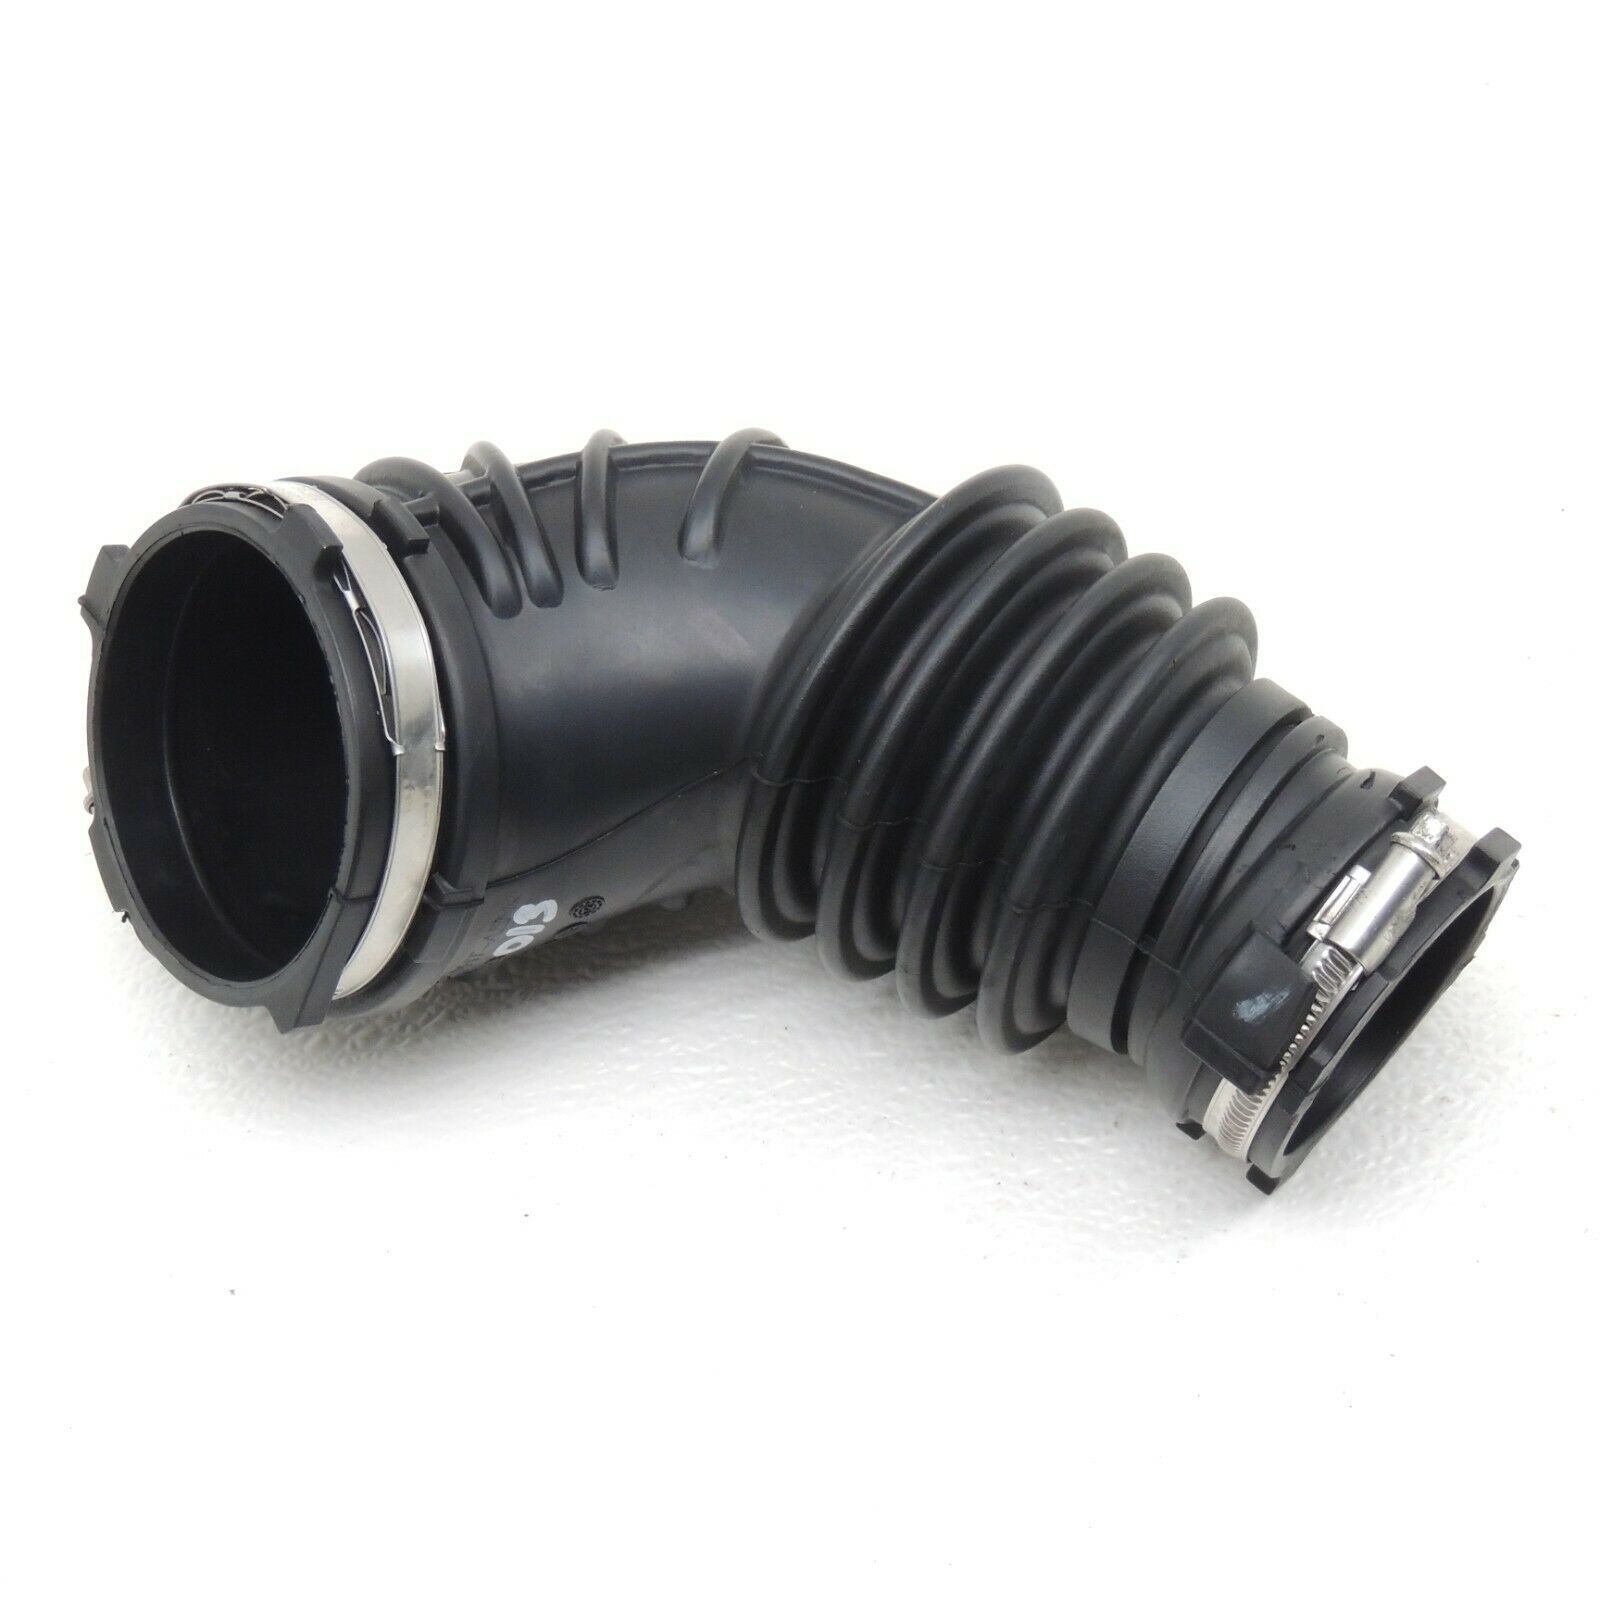 2009-2012 Audi A5 2.0T Air Cleaner Intake Hose Tube Pipe Boot 06H129629E -013 - $19.80